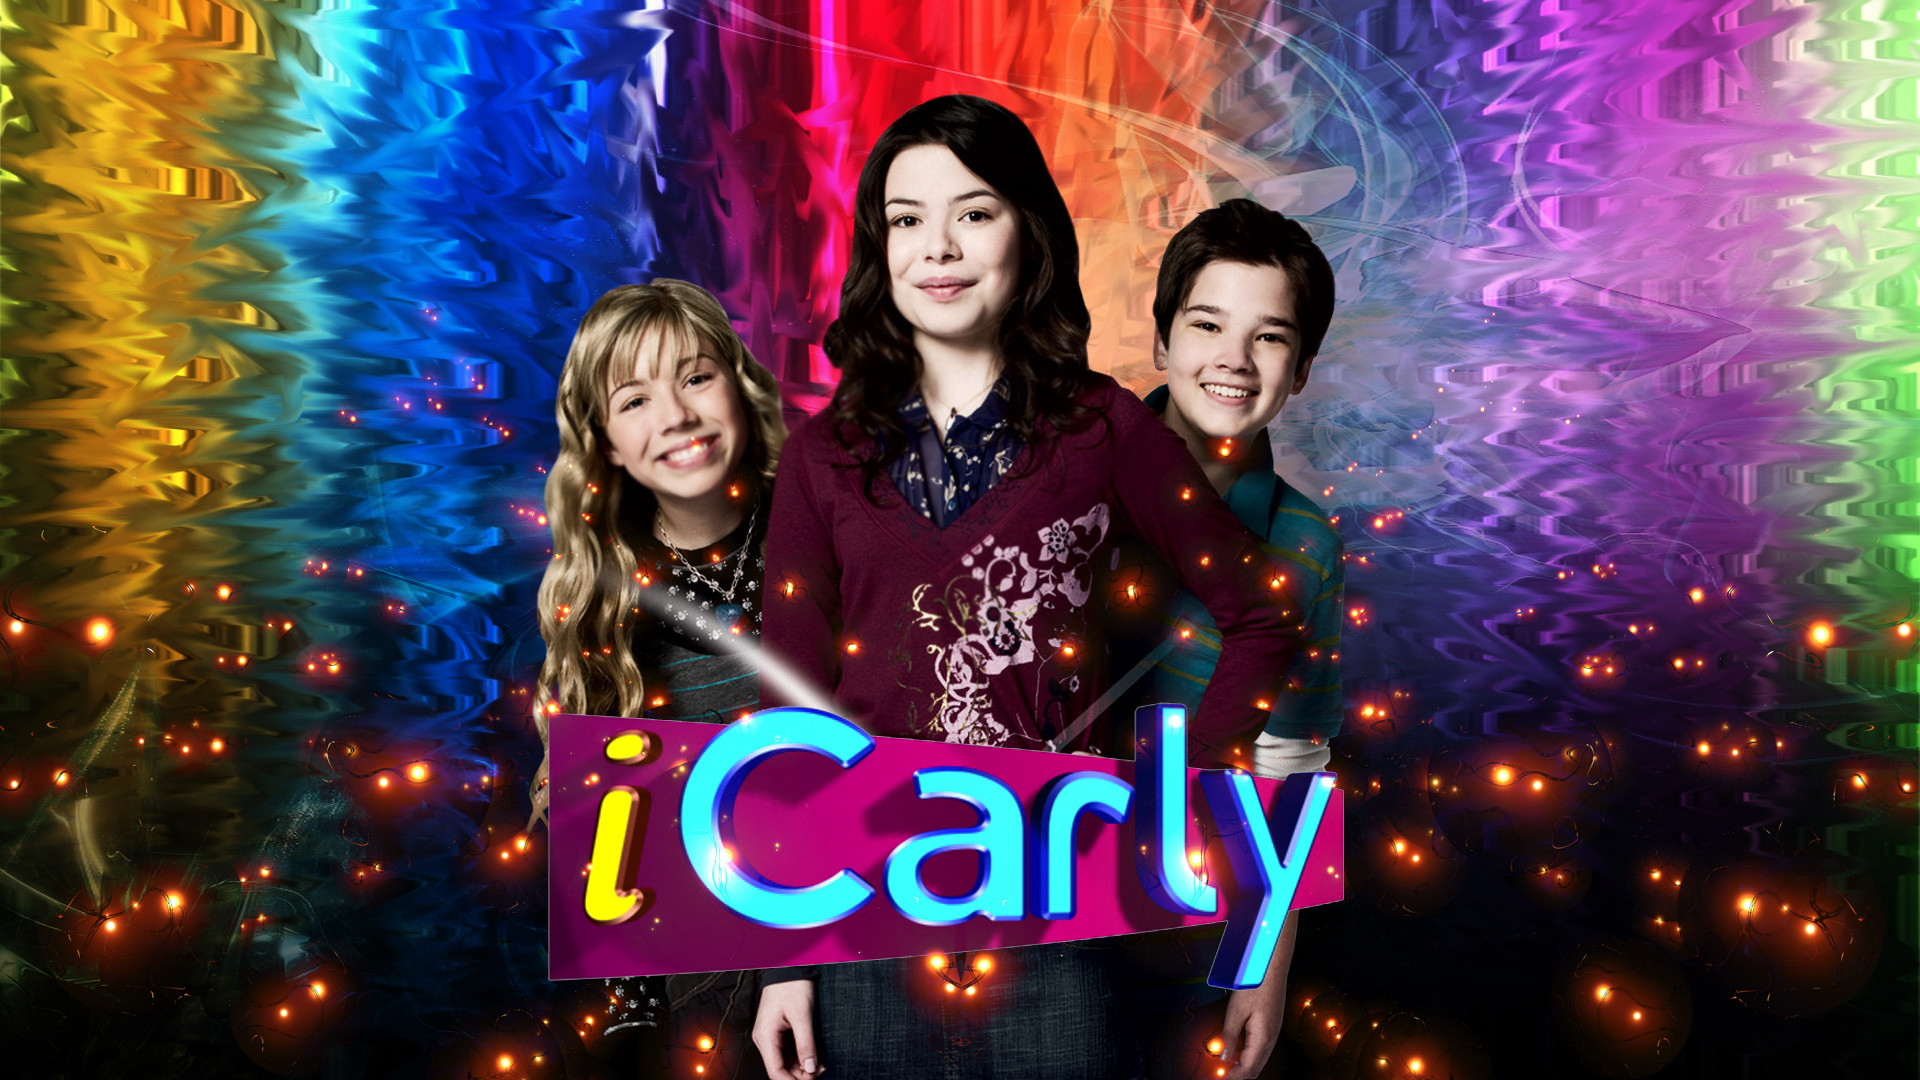 1920x1080 Wallpaper iCarly by Guilherme2502 Wallpaper iCarly by Guilherme2502